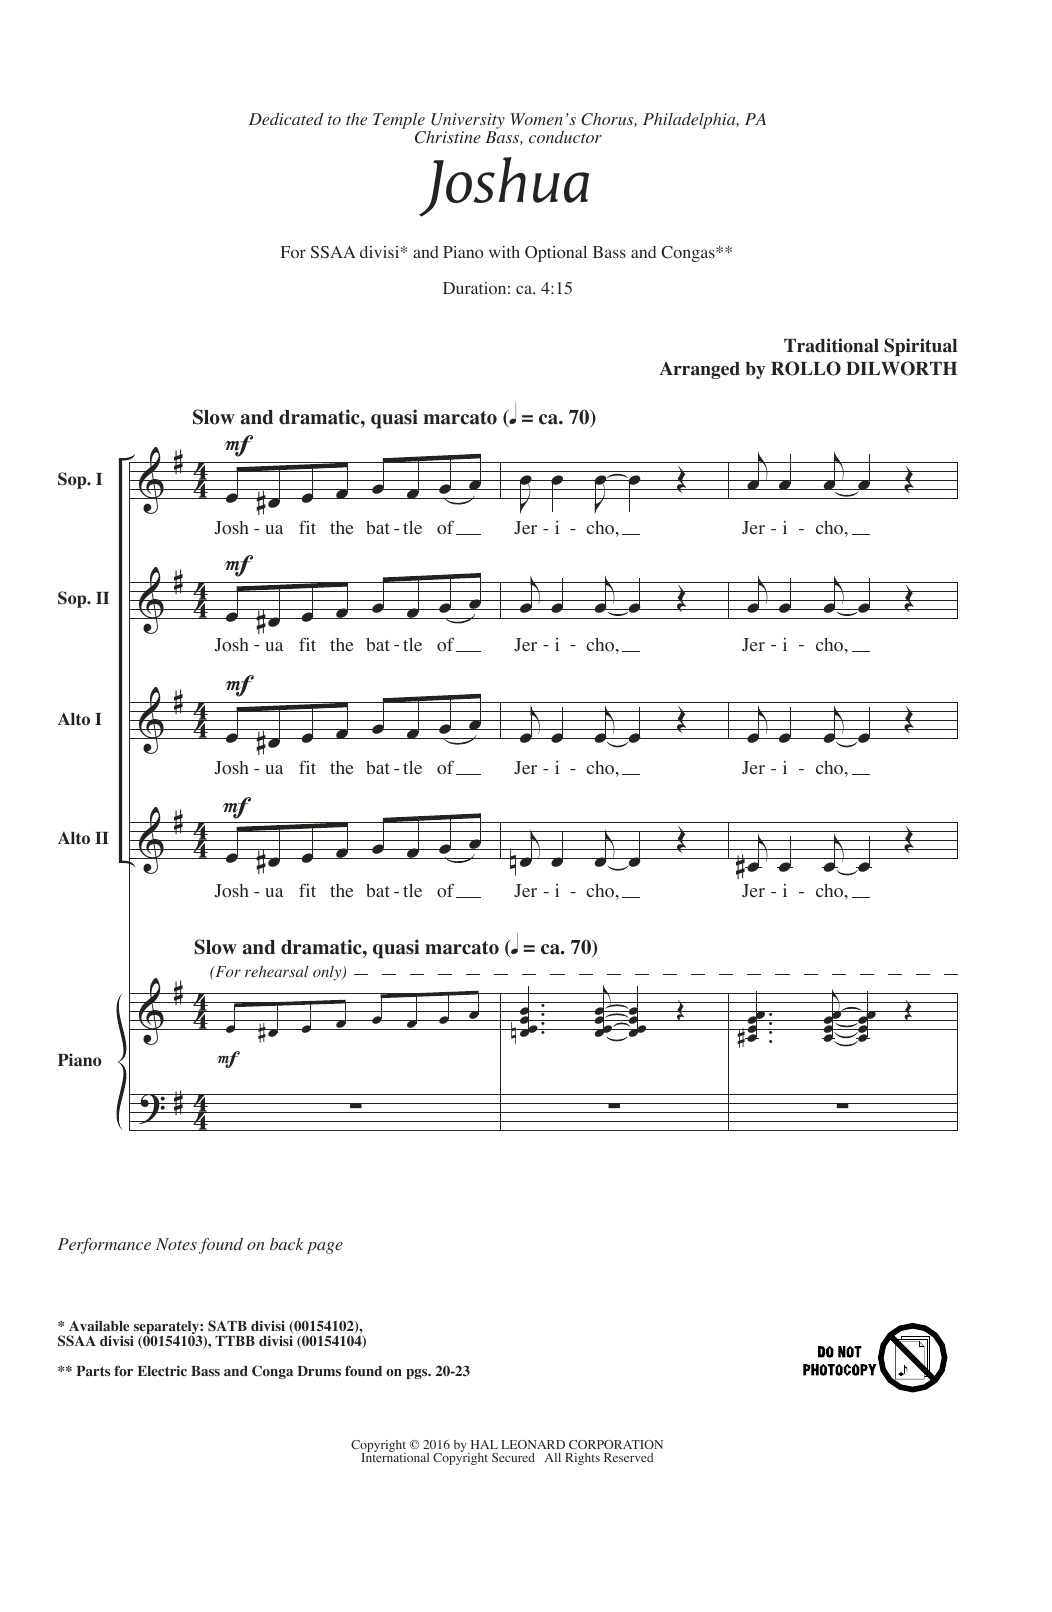 Download Rollo Dilworth Joshua (Fit The Battle Of Jericho) Sheet Music